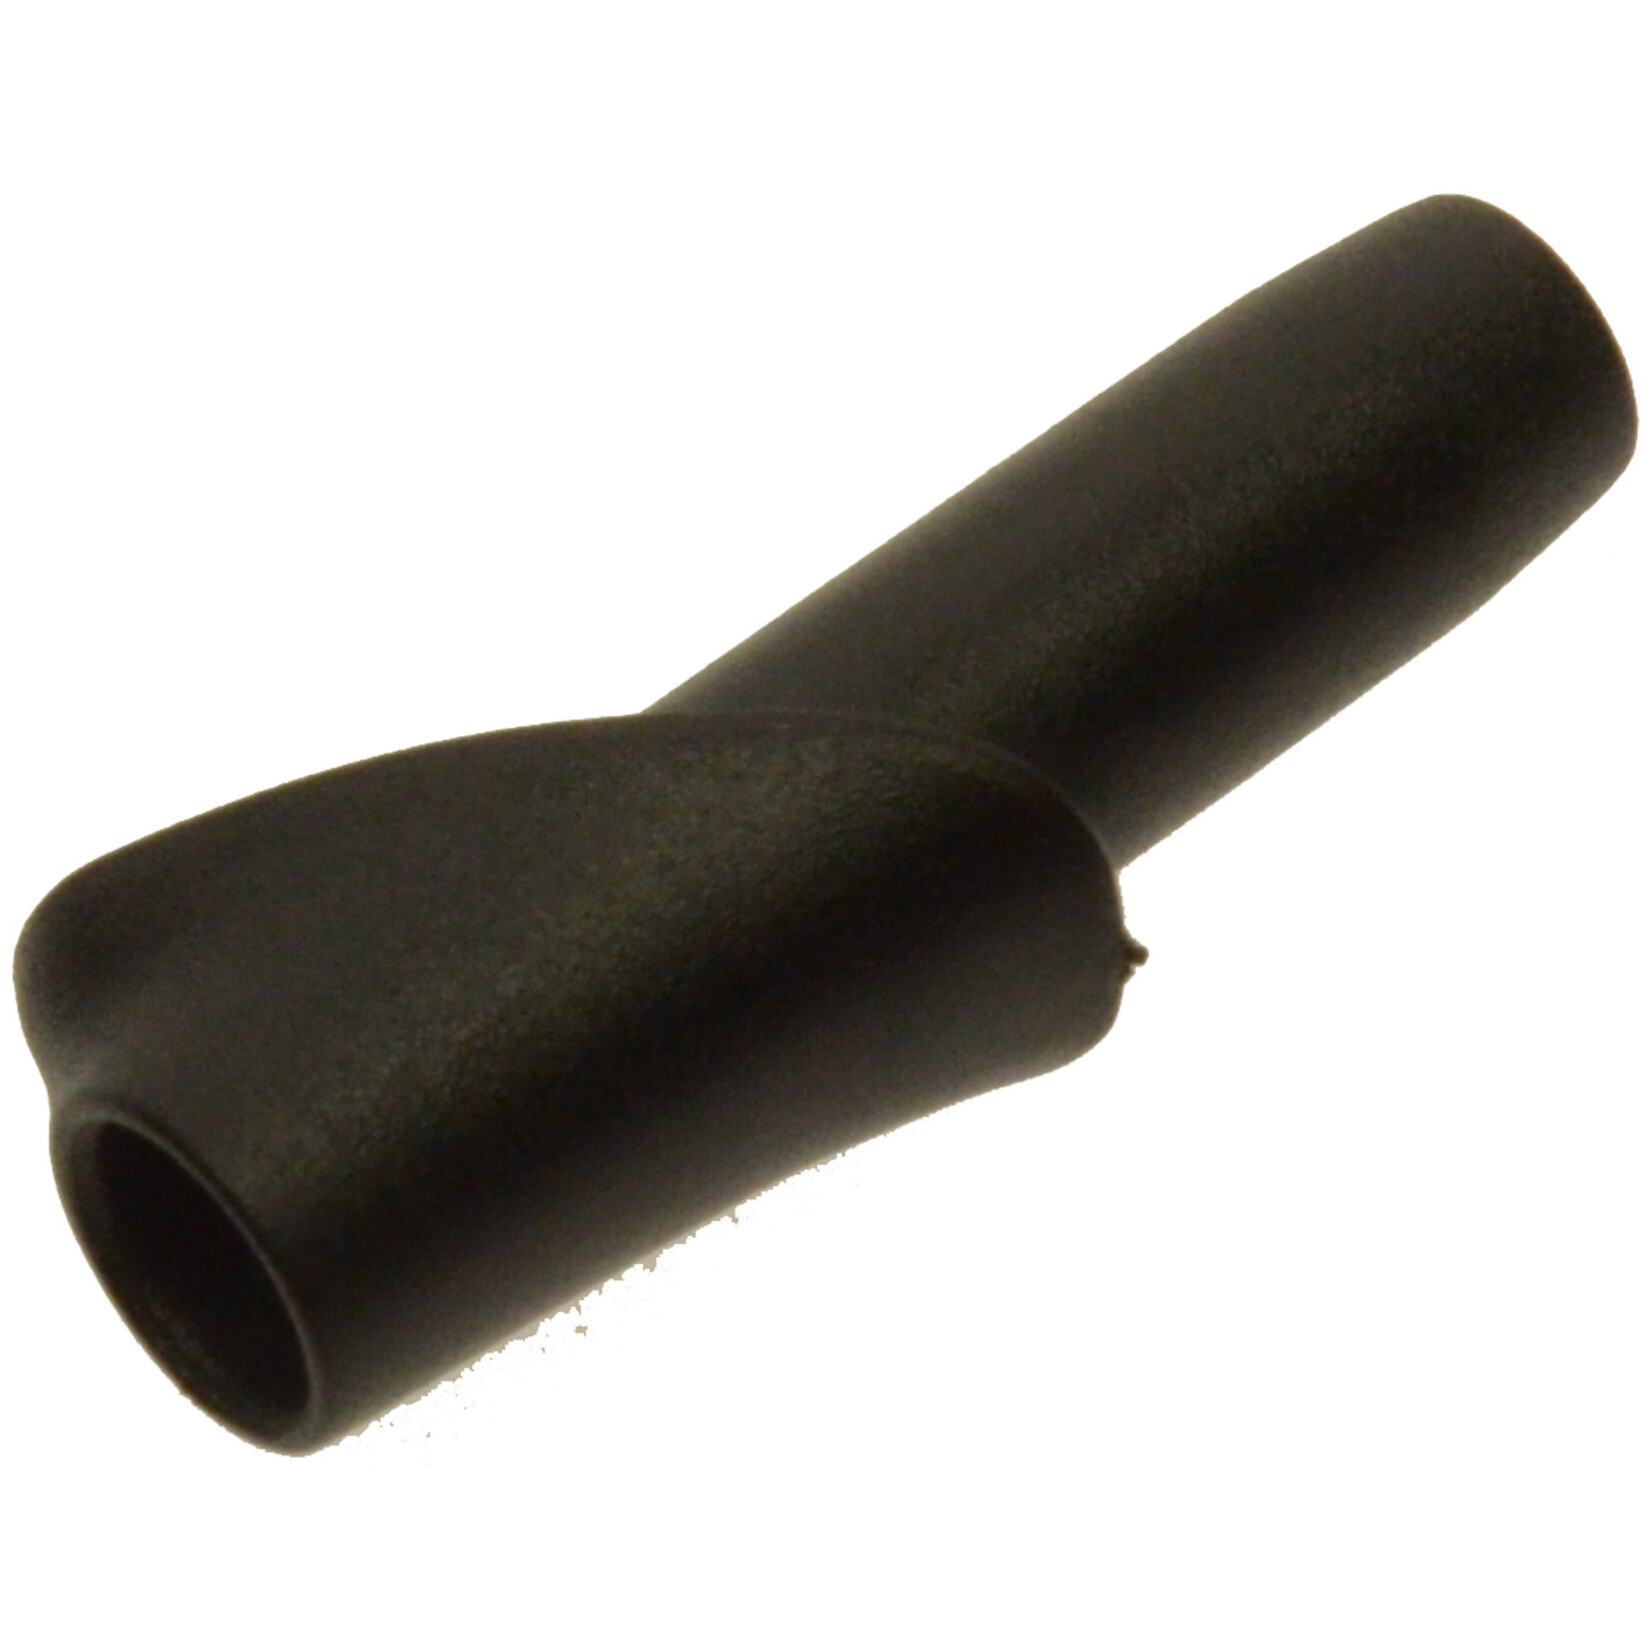 NORCO Norco Gizmo Insert Shift Cable Stop Port